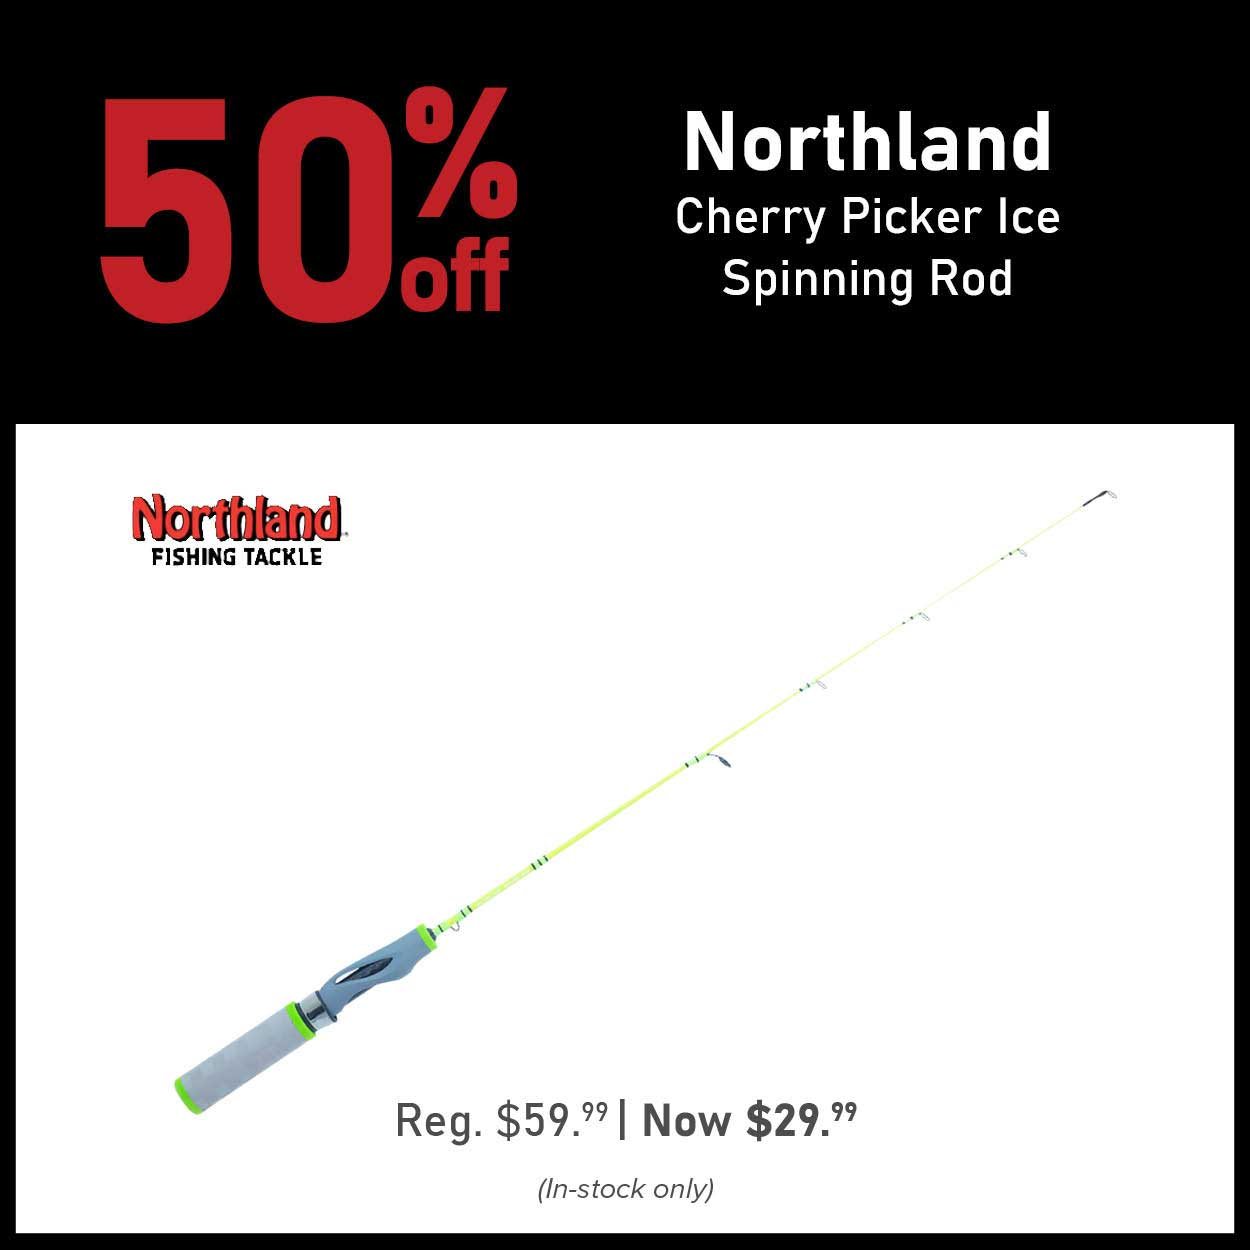 50% Off Northland Cherry Picker Ice Spinning Rod Reg. $59.99 | Now $29.99 (In-stock only)